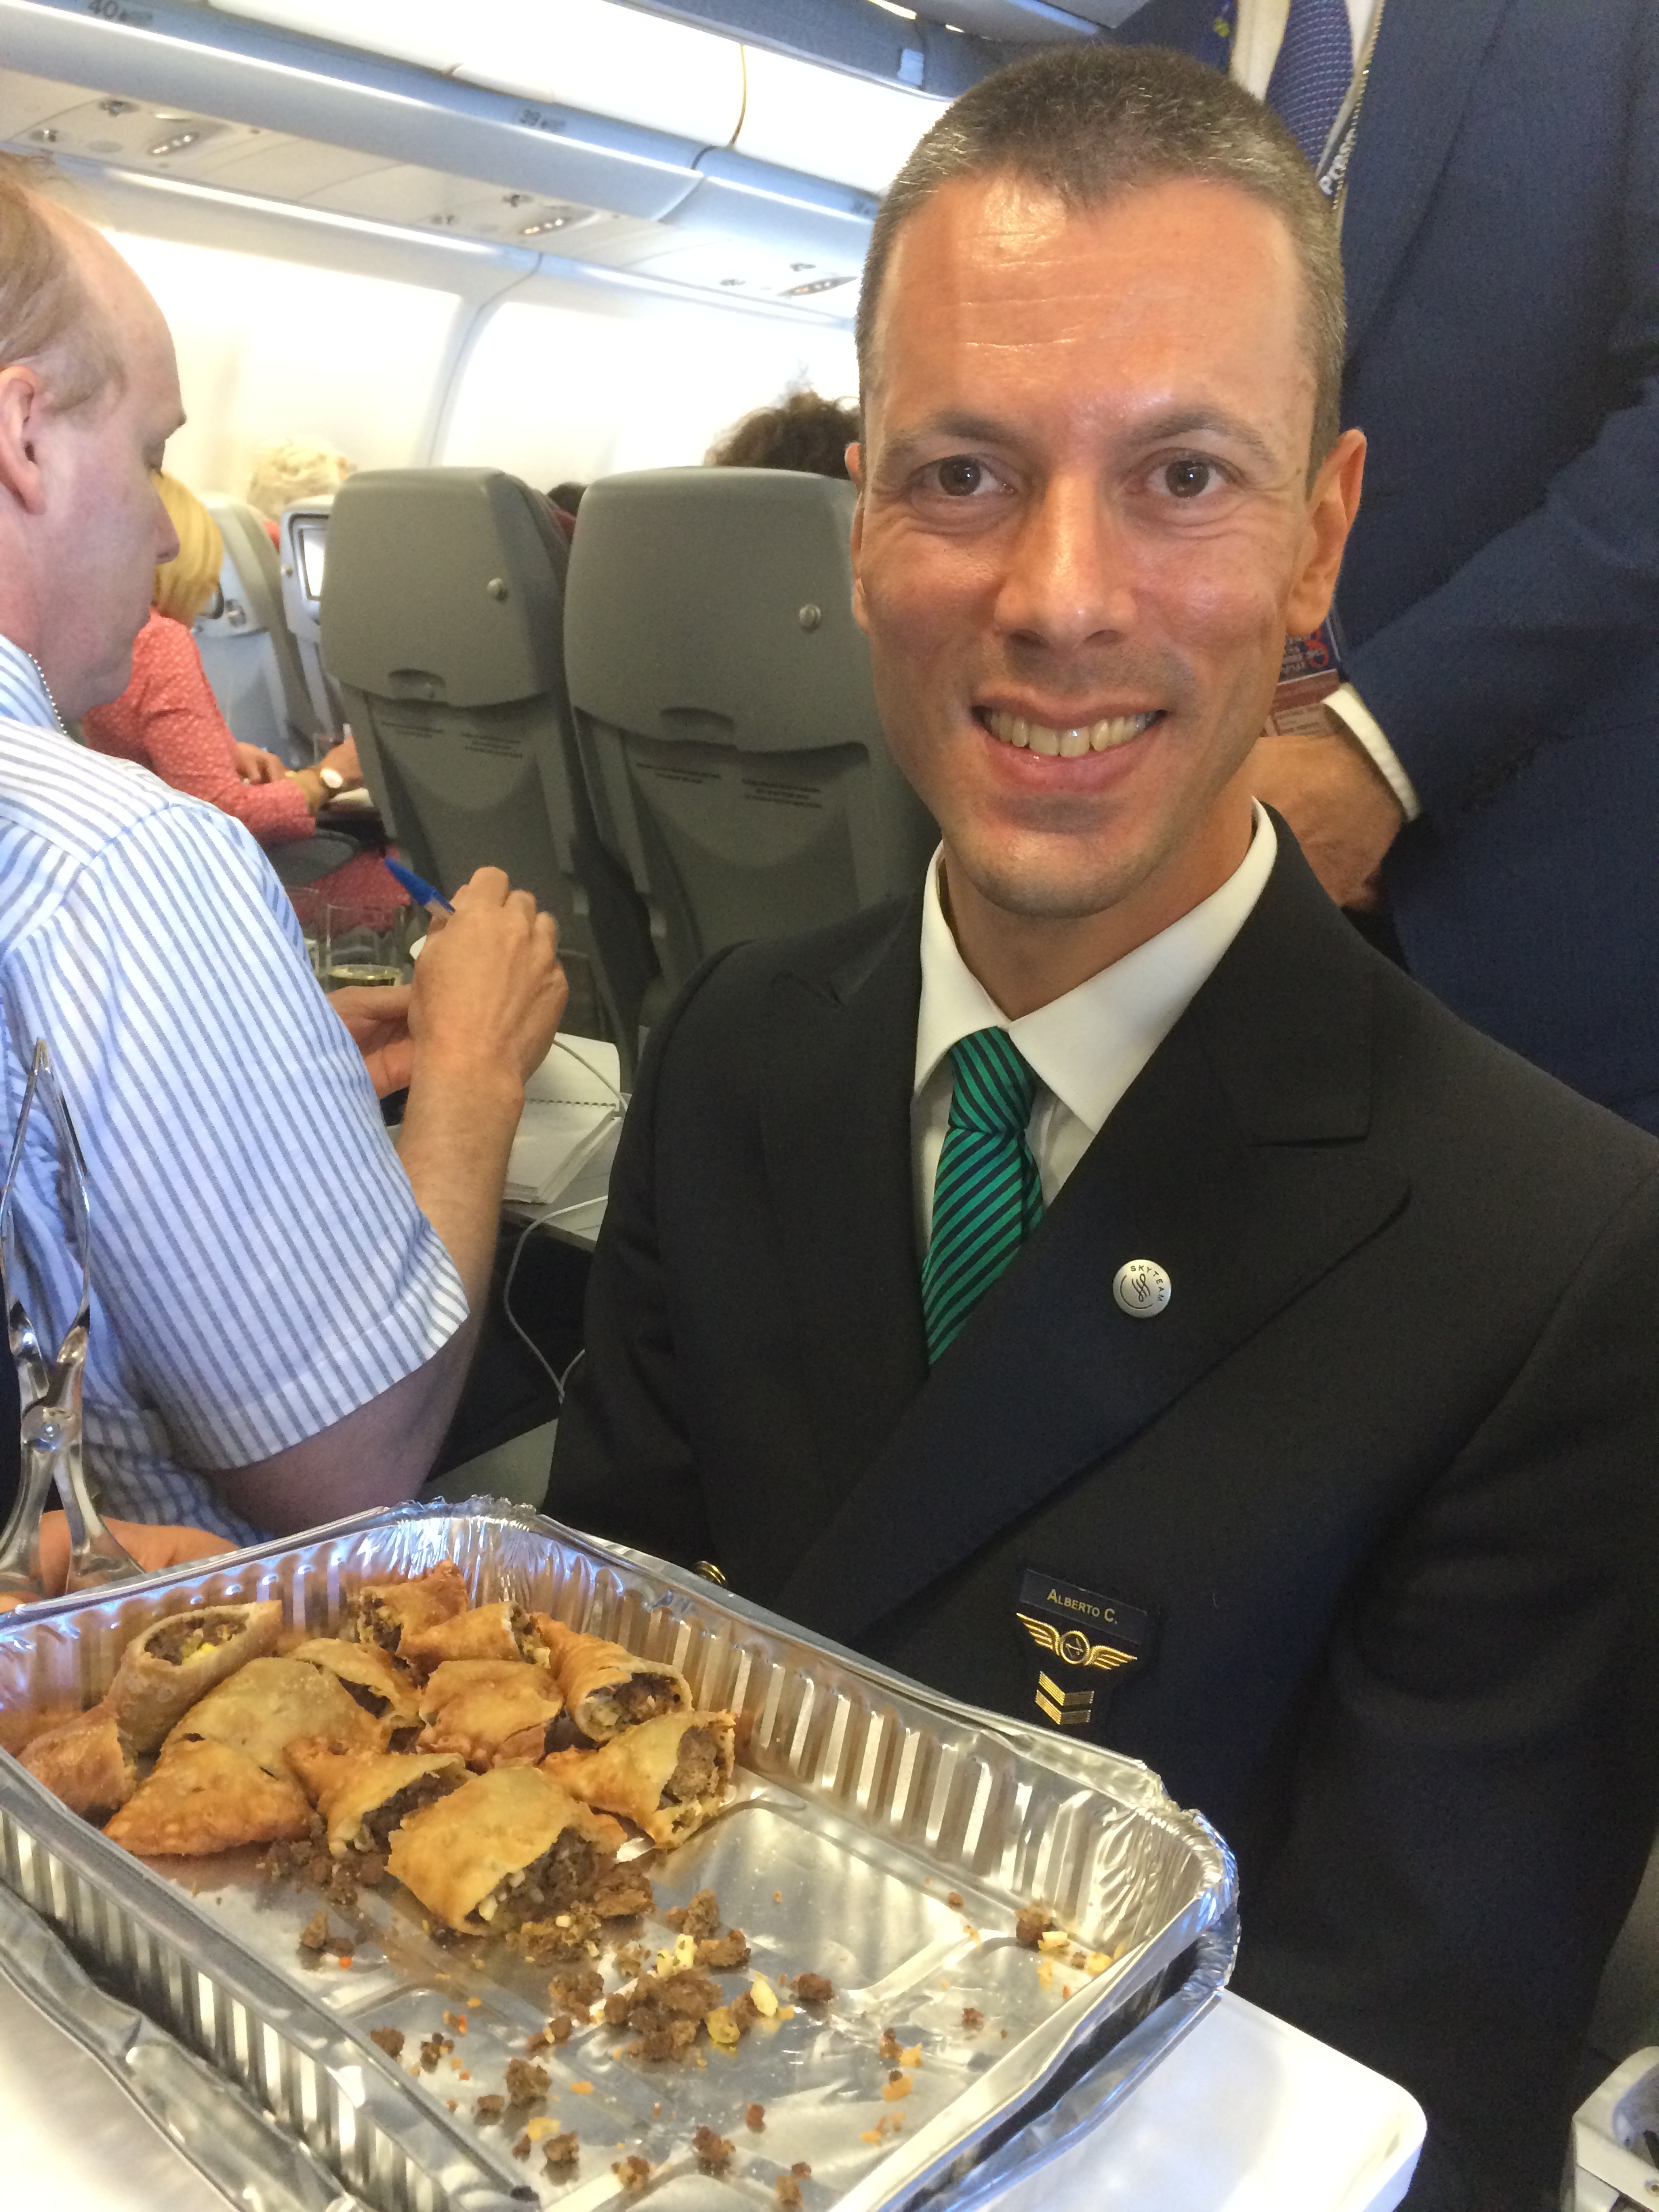 Alitalia flight attendant serves the empanadas that were a gift to Pope Francis to journalists aboard the papal flight from Rome to Havana. (Elizabeth Dias, Sept 19, 2015)